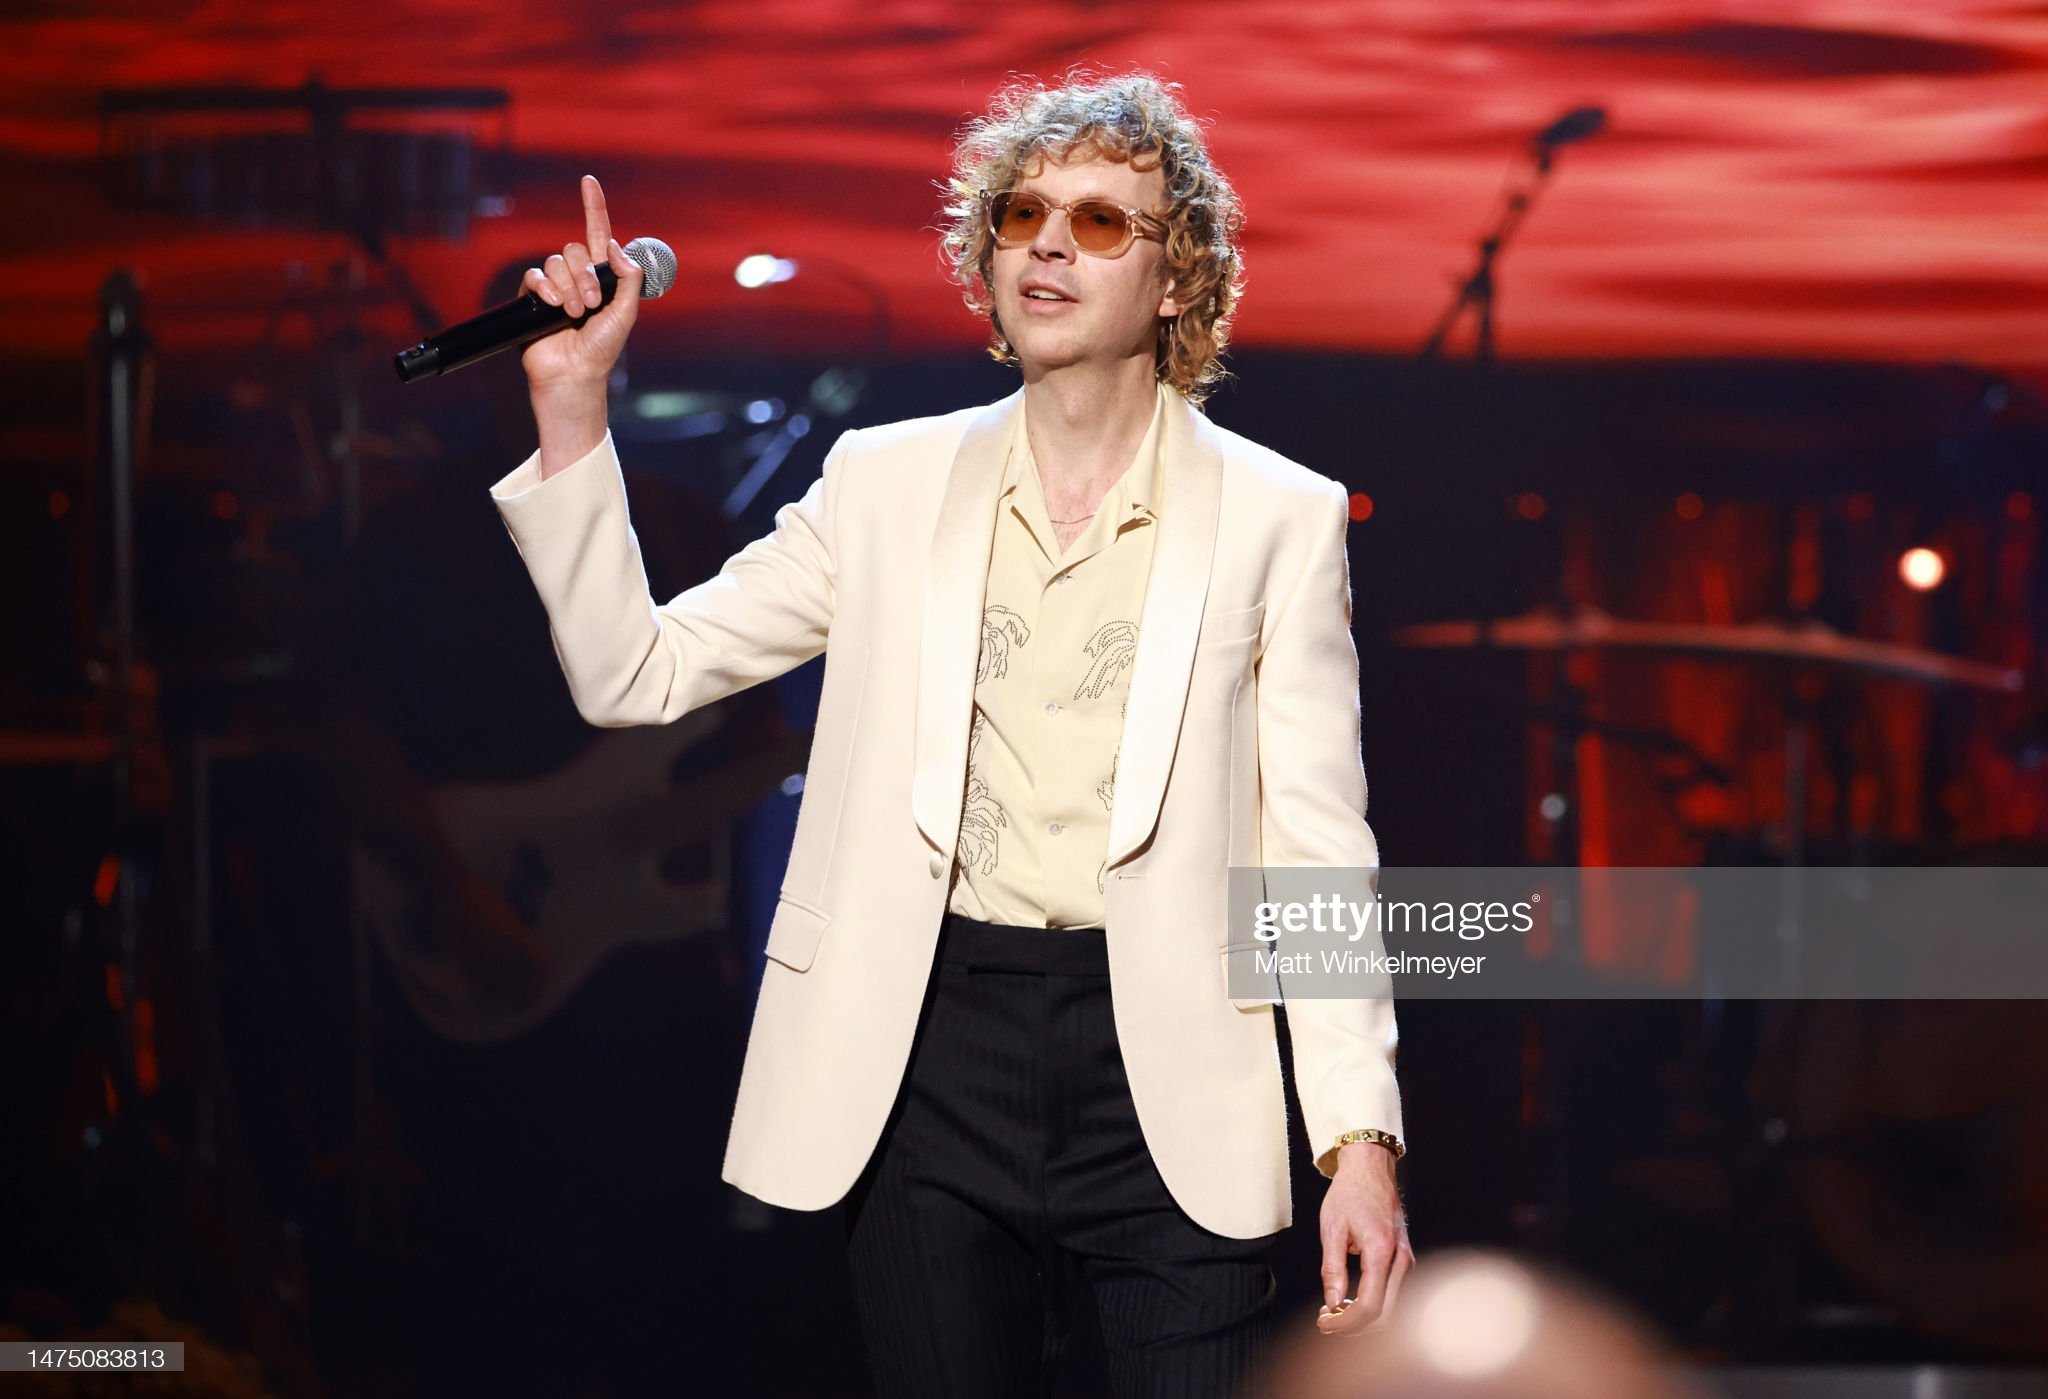 gettyimages-1475083813-2048x2048.jpg